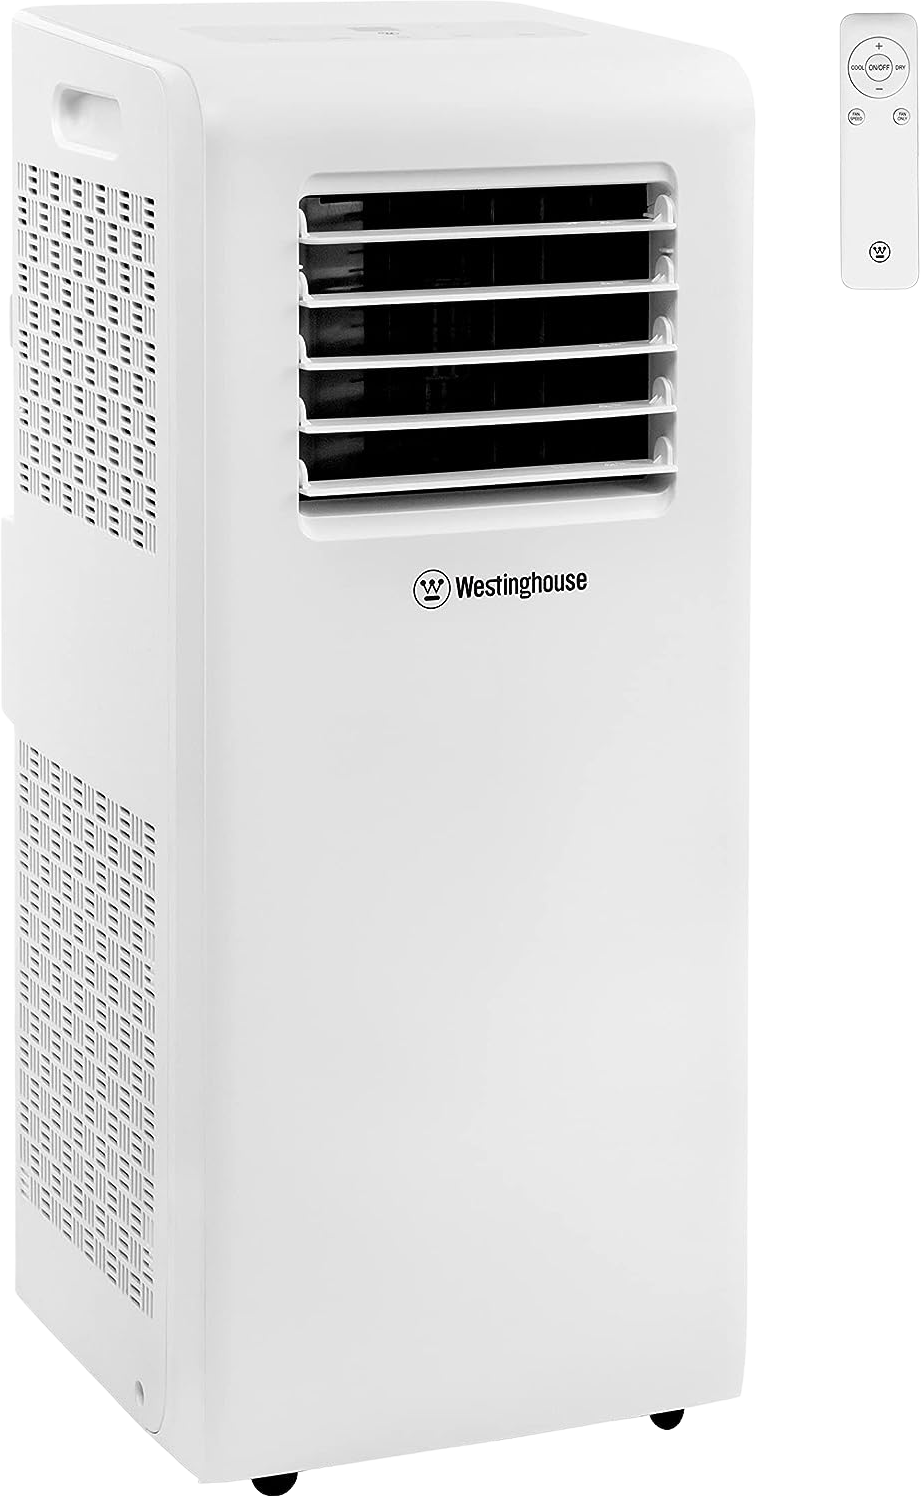 Westinghouse 10,000 BTU Portable Air Conditioner with Remote 3-in-1 For Rooms Up to 300 sq. ft. WPAC10000 White New